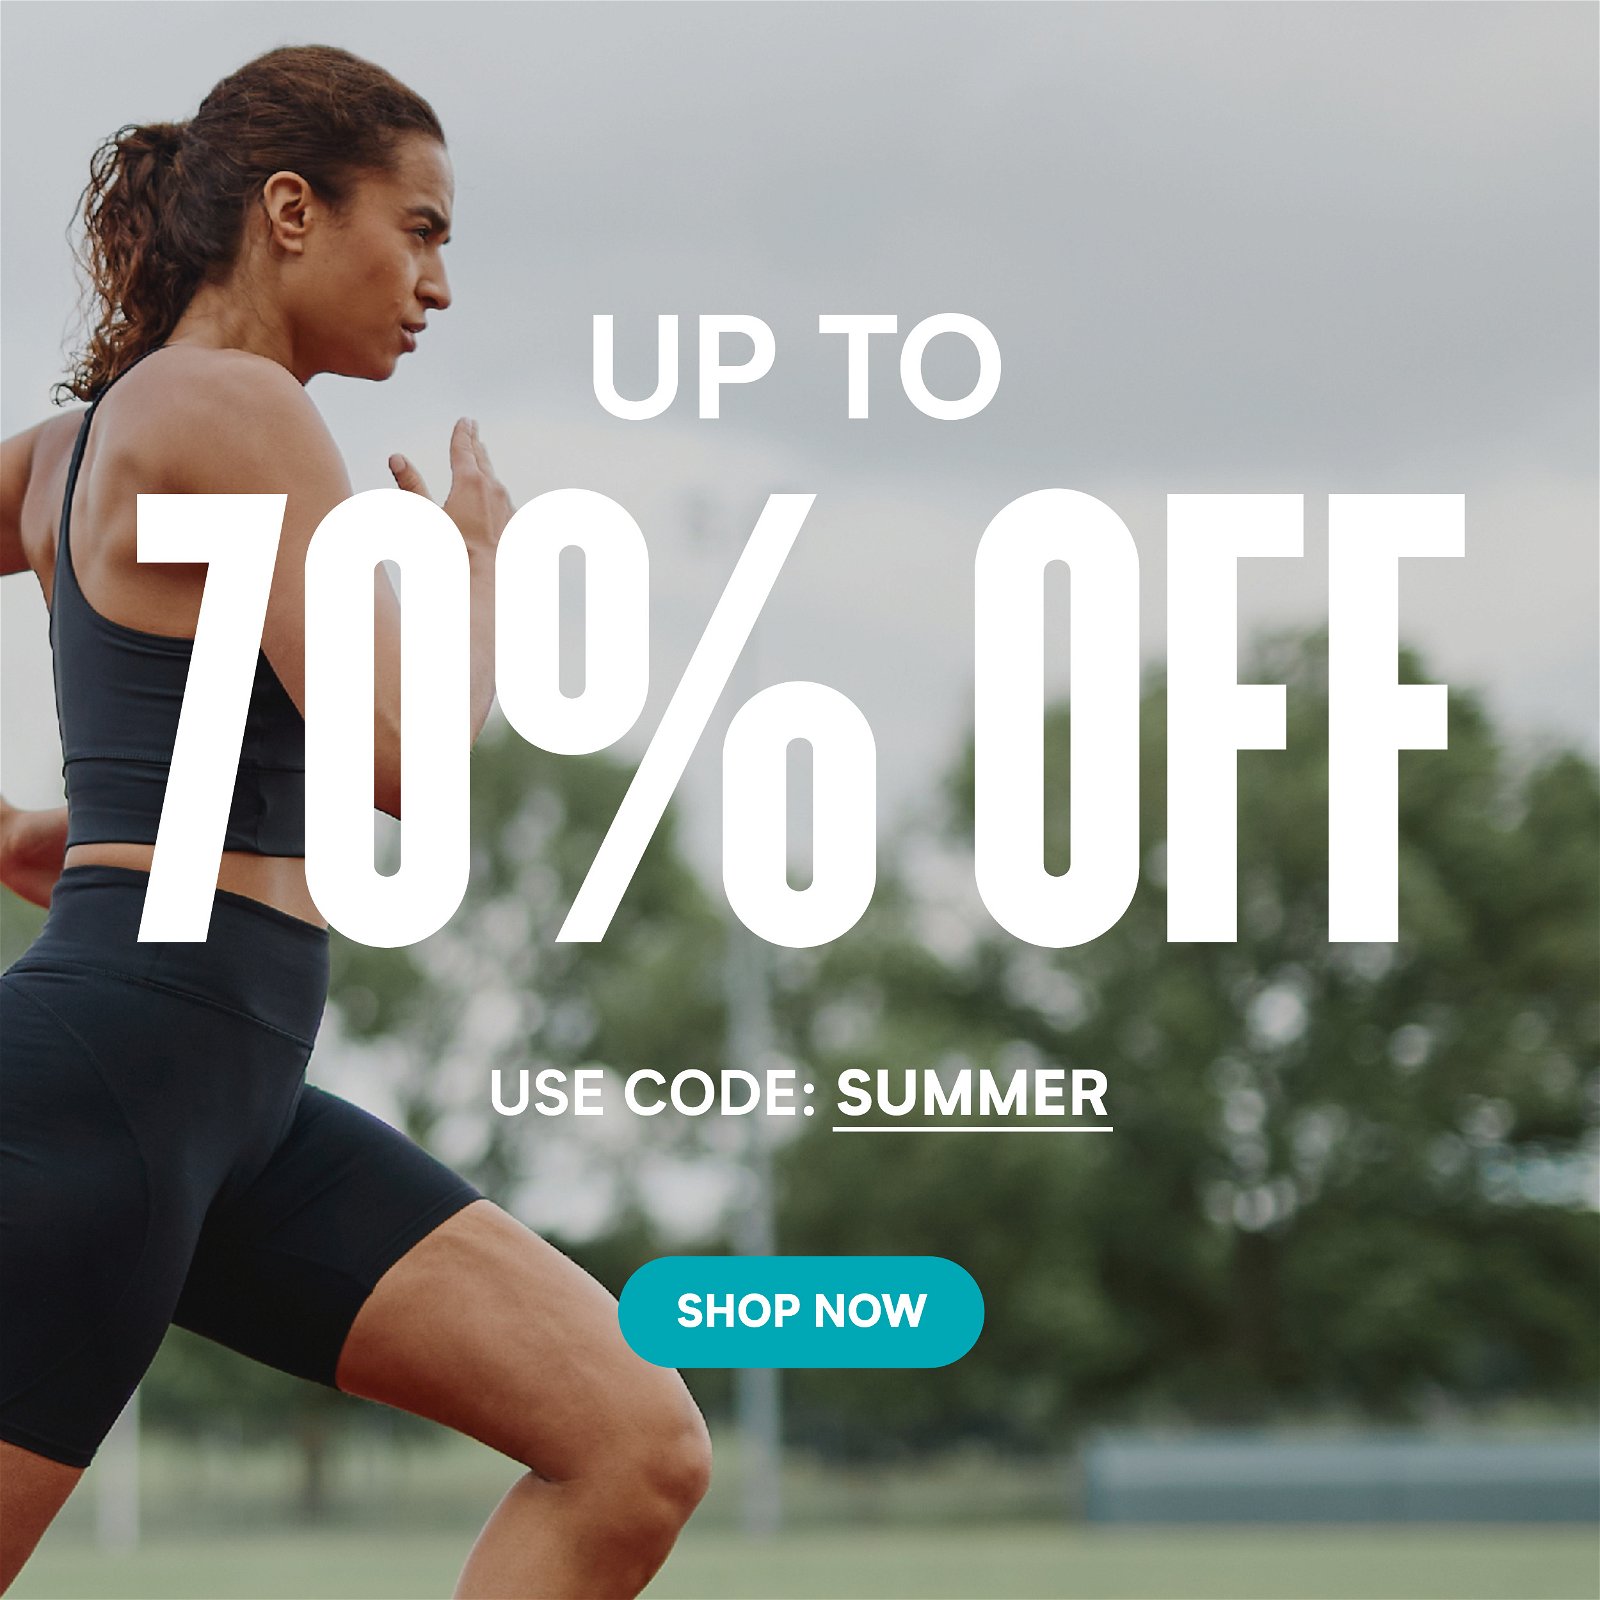 Up to 70% off this summer!